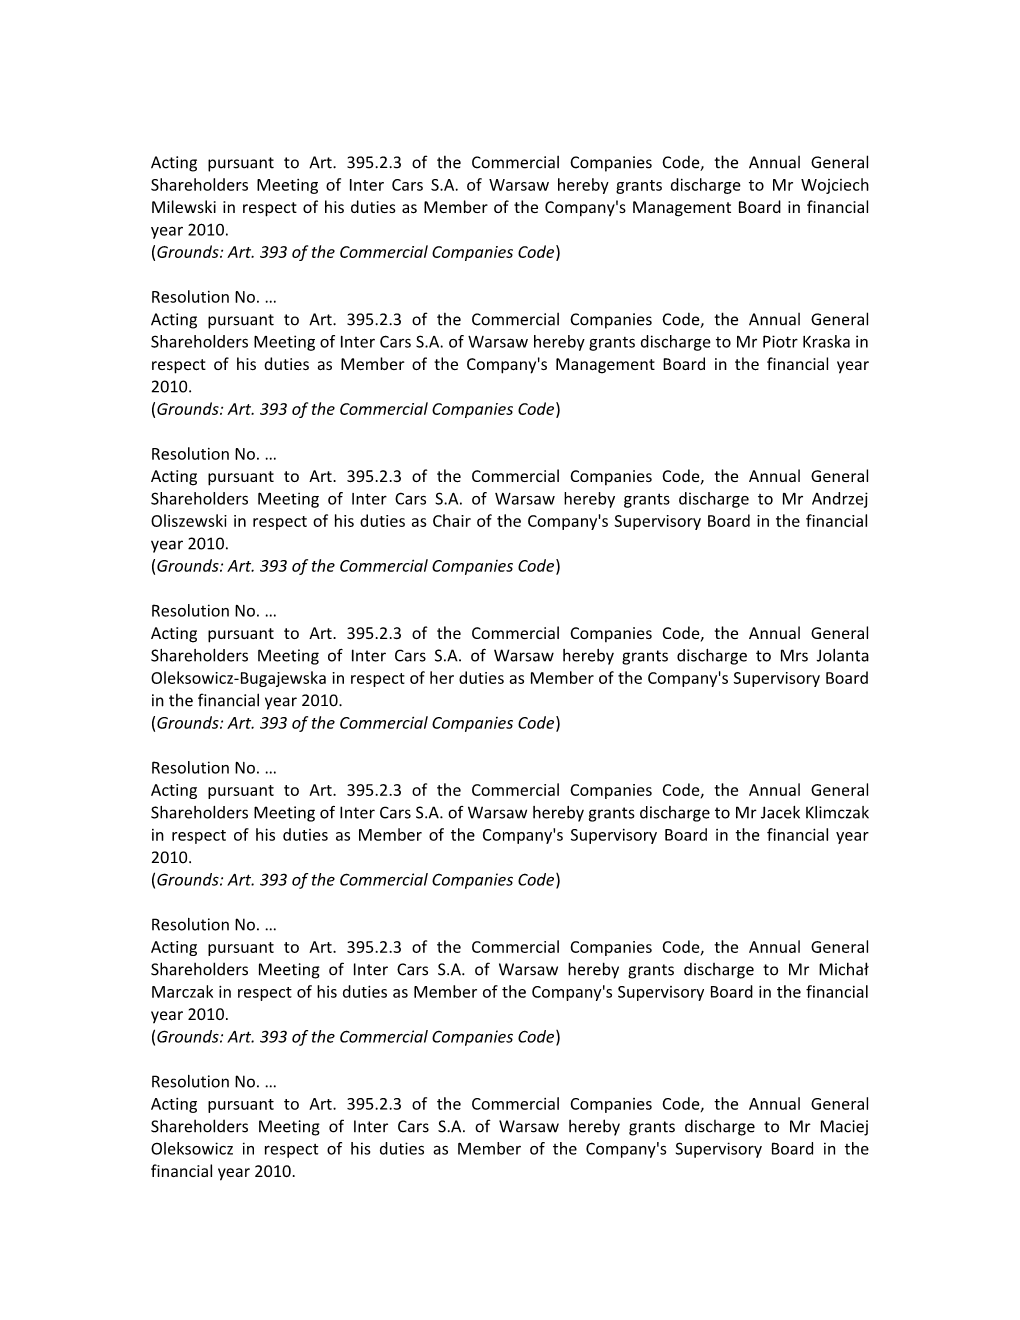 Draft Resolutions of the Annual General Shareholders Meeting to Be Held on May 11Th 2011